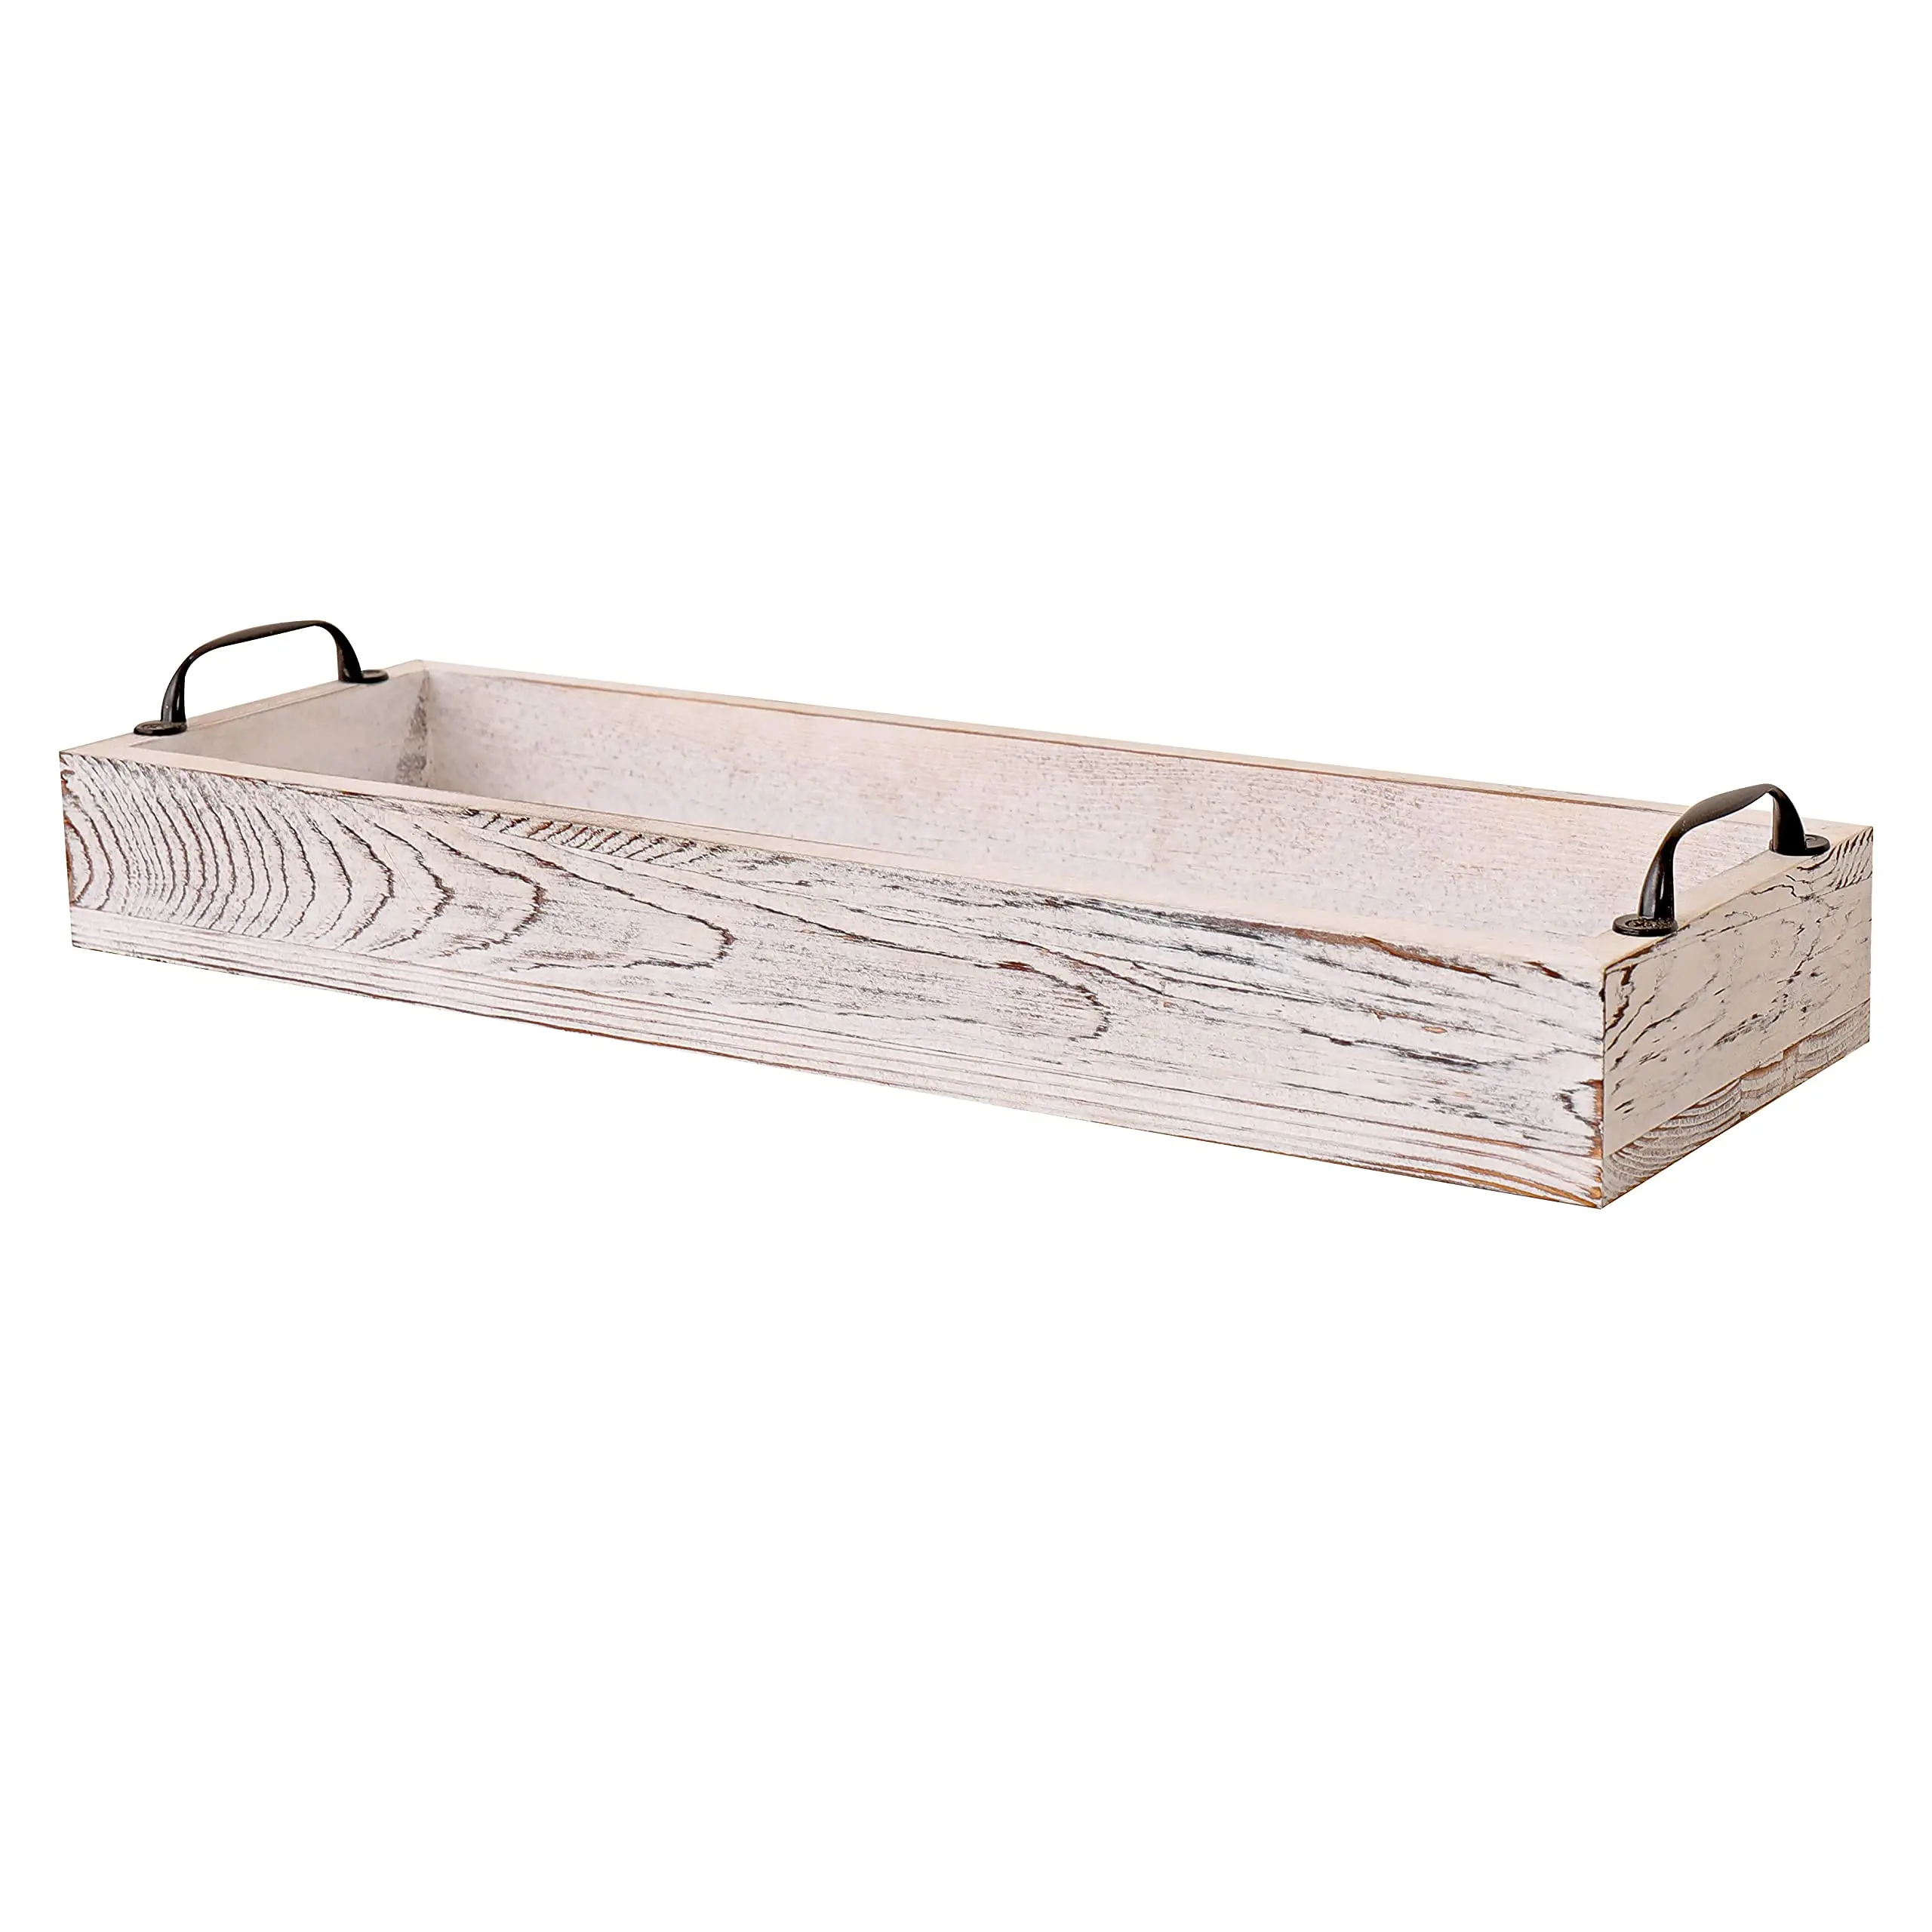 Rustic Wooden Serving Trays Rectangular Wood Serving Tray with Handle